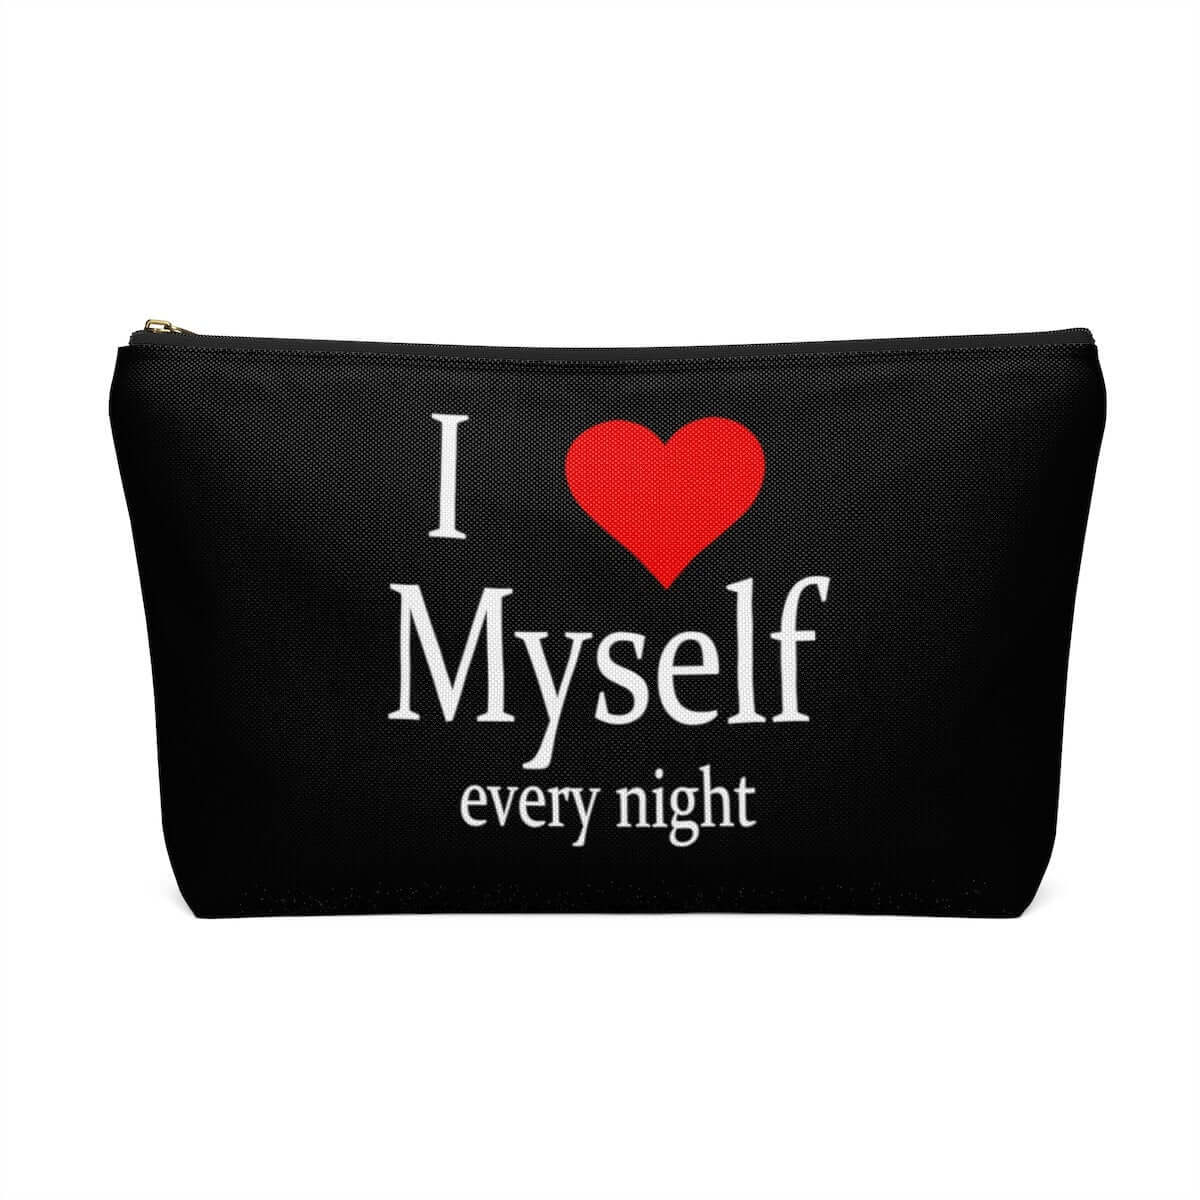 Sex toy pouch bag for vibrator or dildo. Adult toy storage. I love myself every night